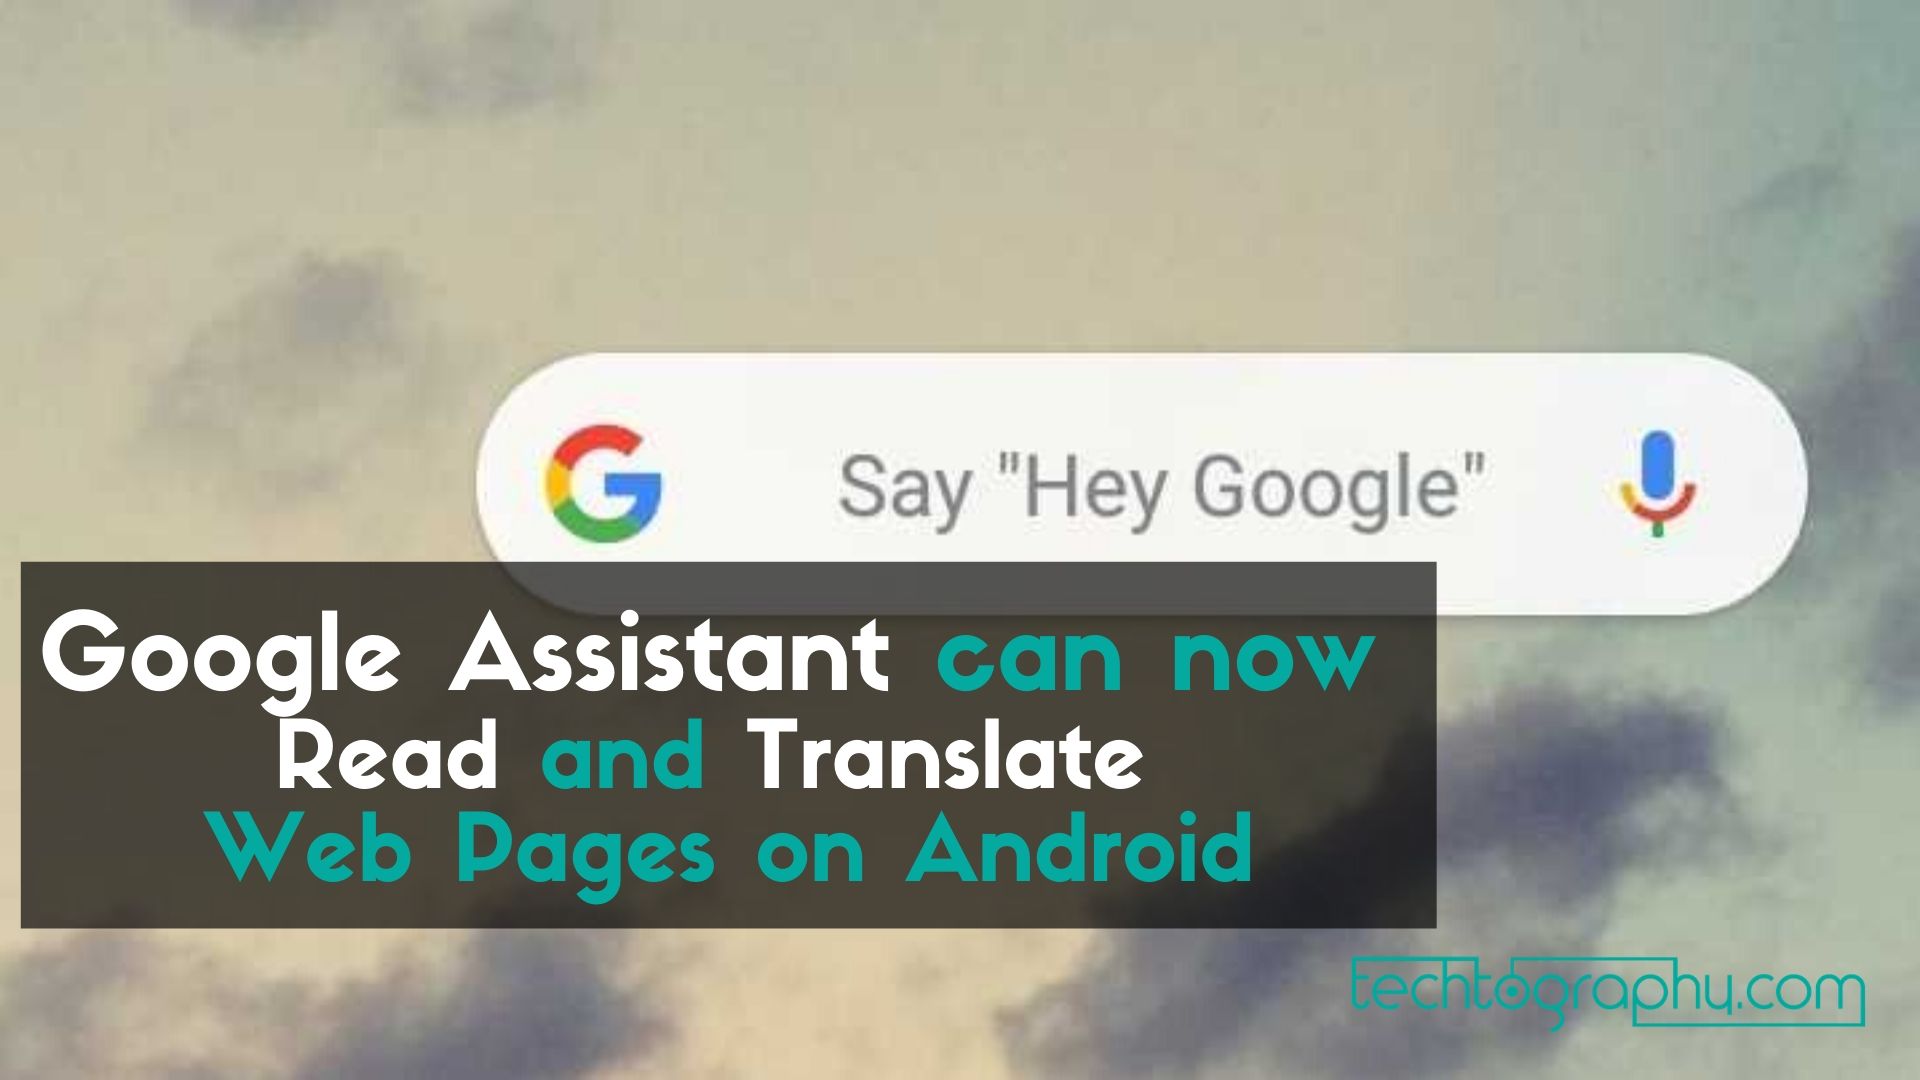 Google Assistant can now Read and Translate Web Pages on Android